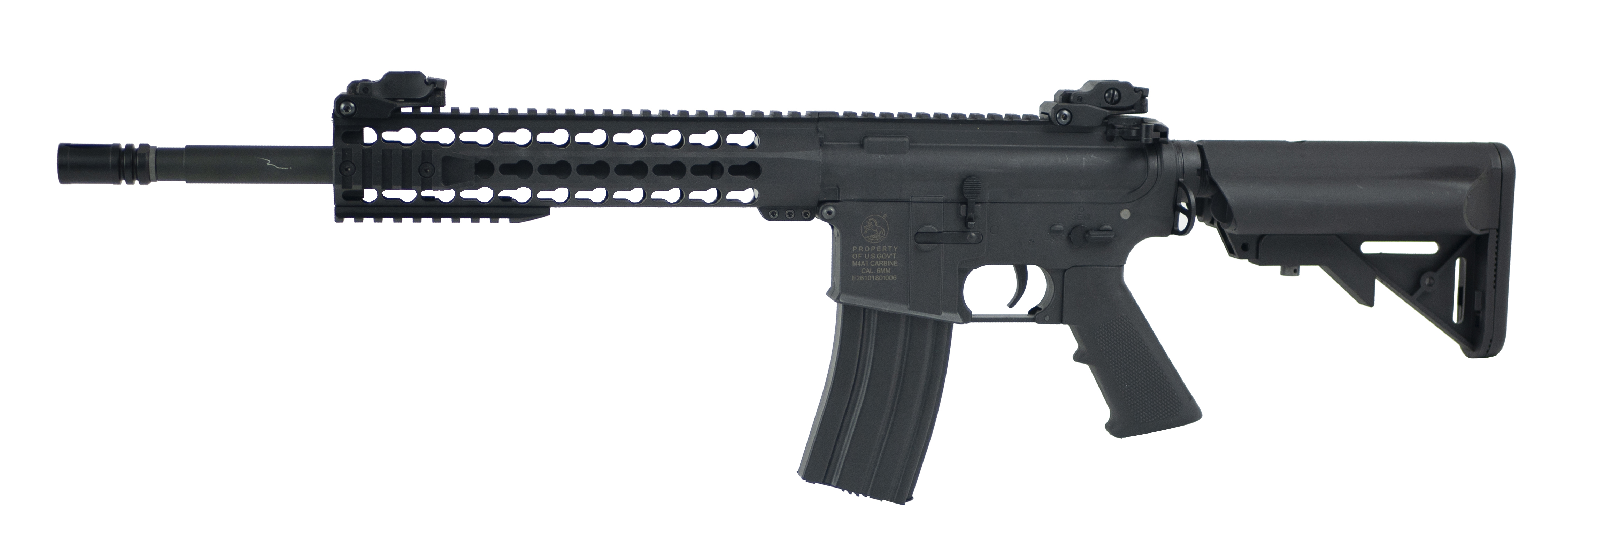 Building an Airsoft U.S. Infantry M4 Clone – The BB Warrior